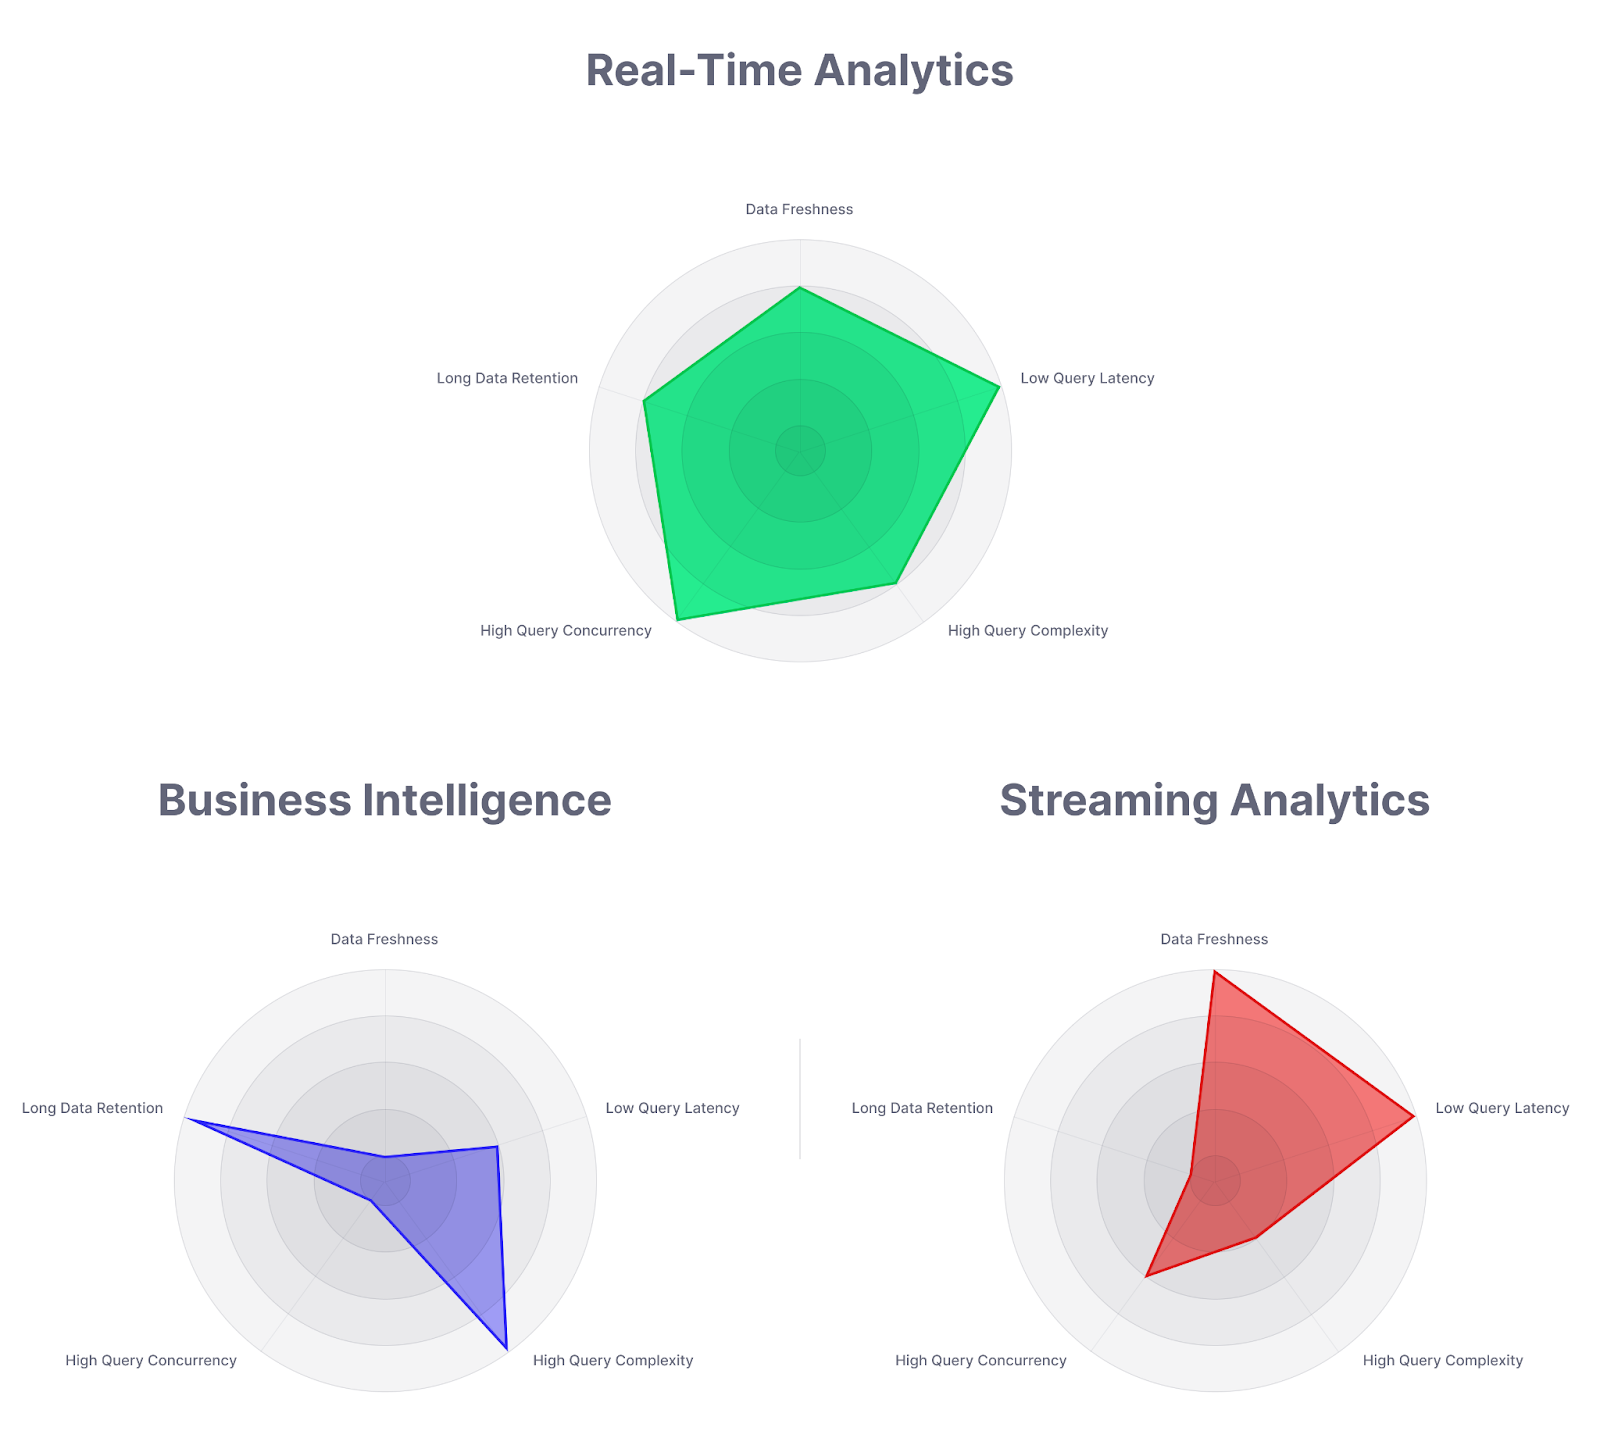 What is the best database for real-time analytics?